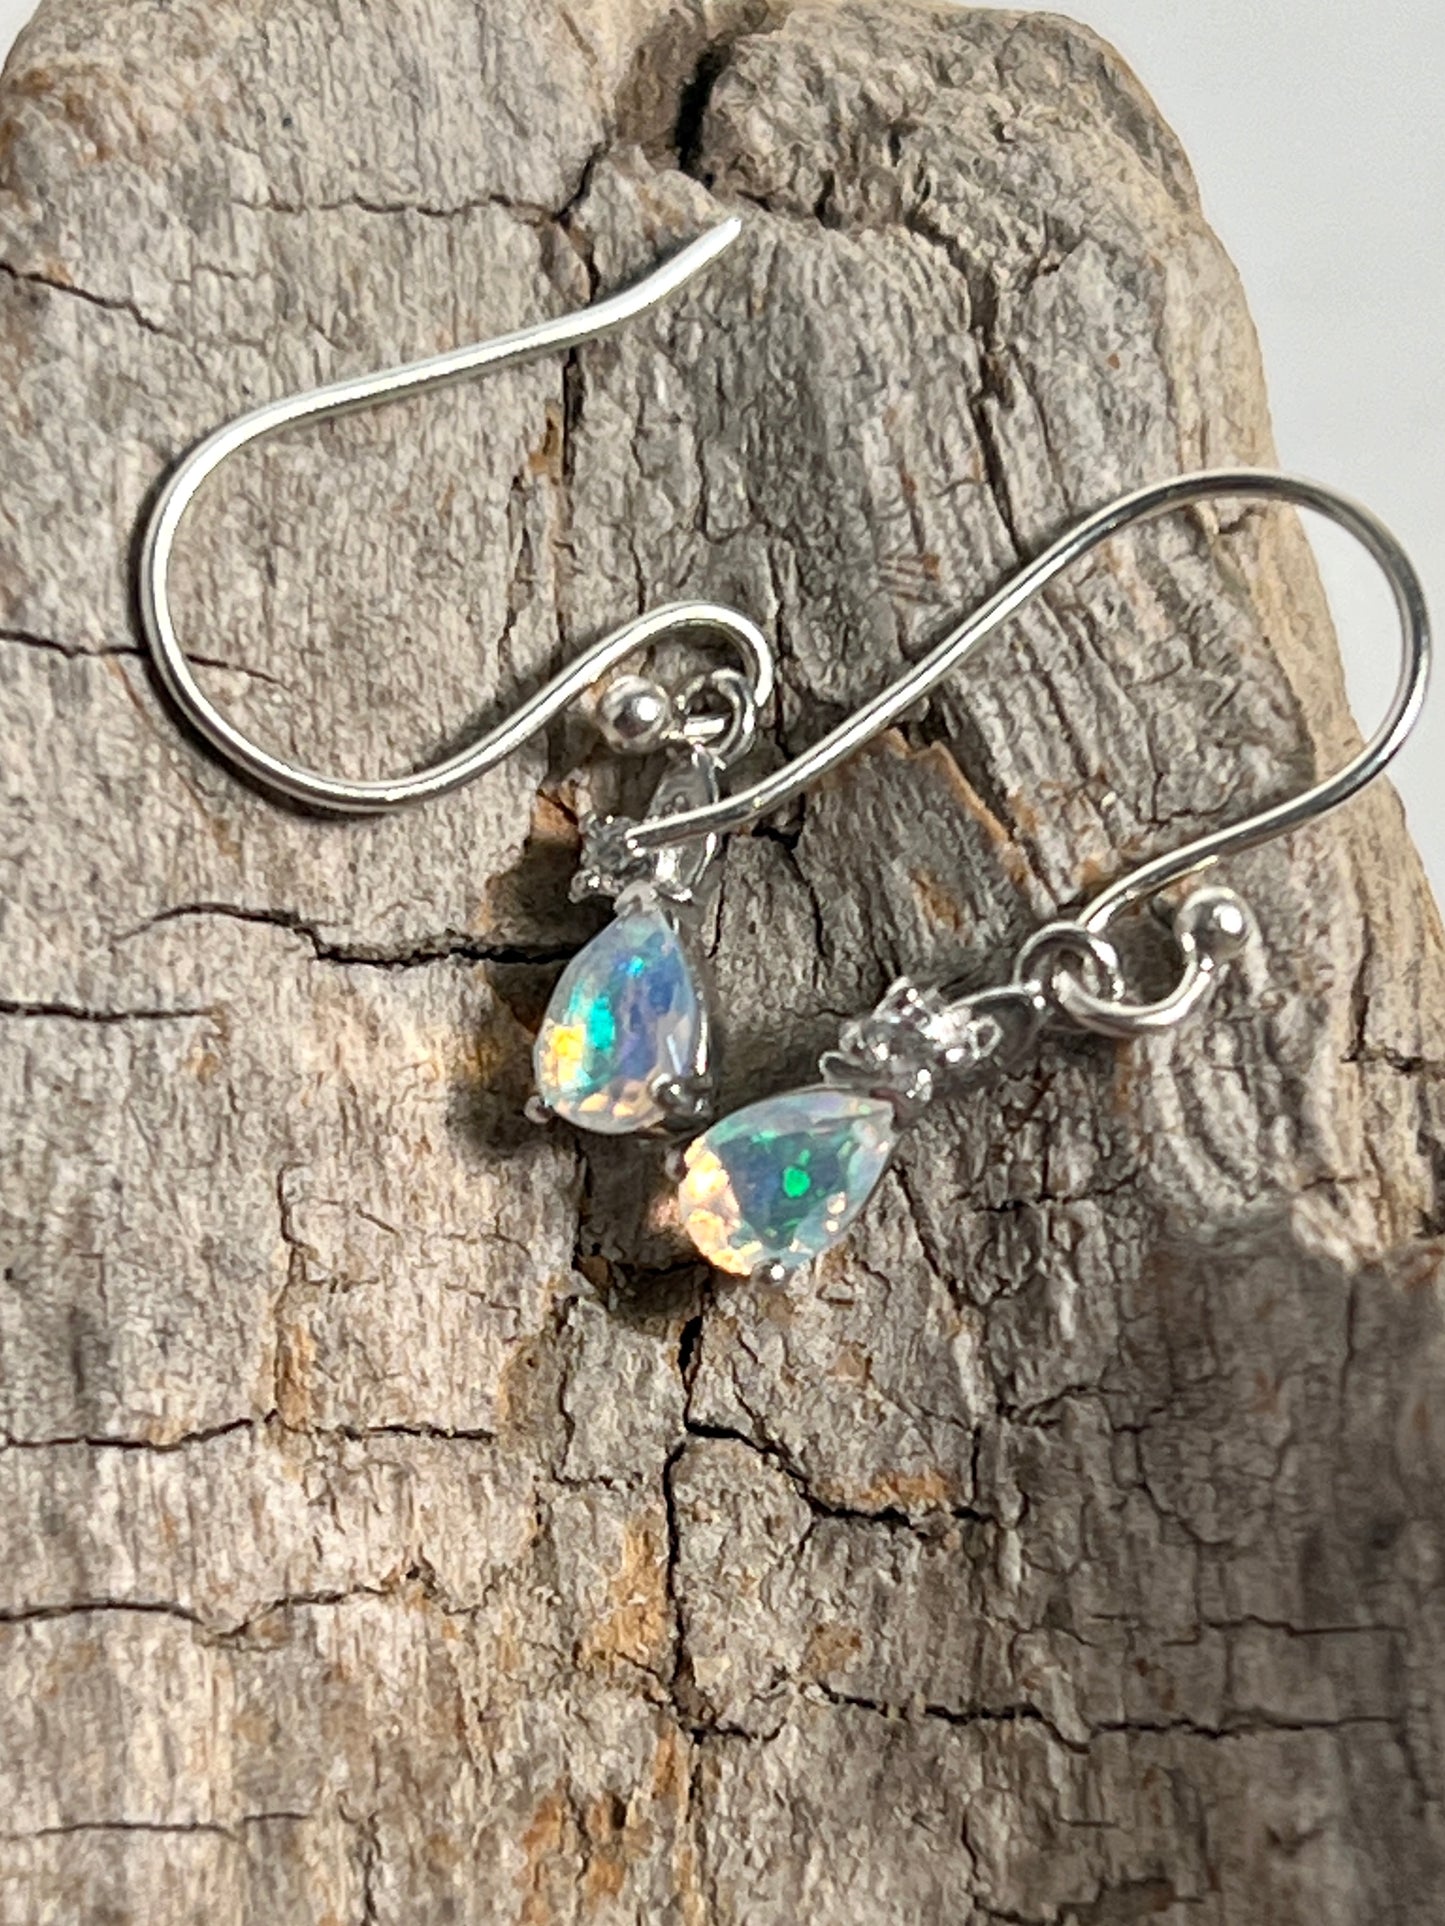 A pair of Super Silver Tiny Teardrop Ethiopian Opal earrings on a piece of wood.